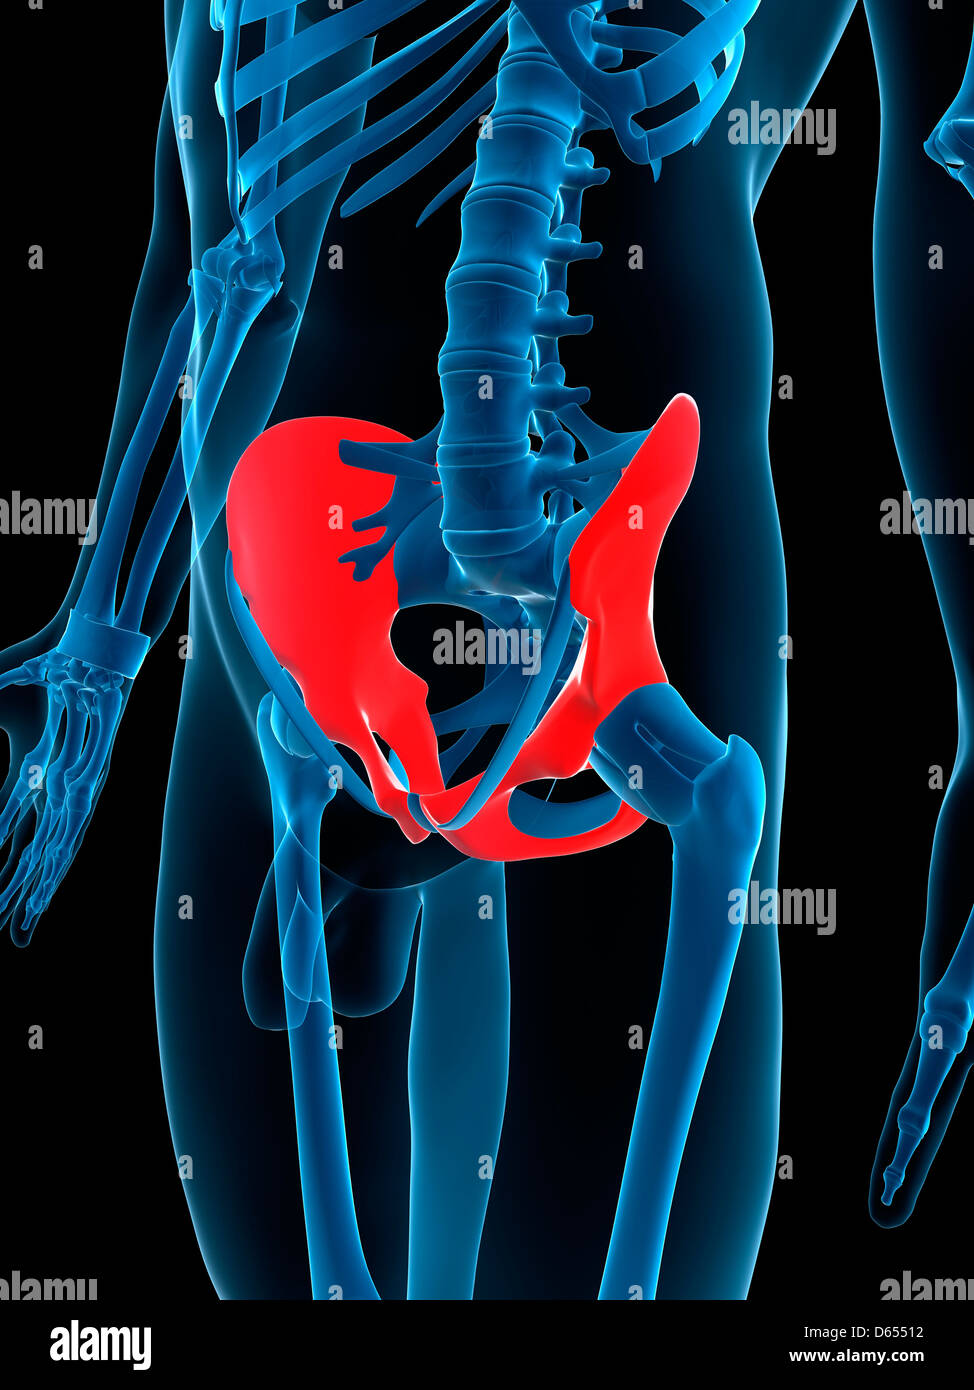 Human Hip Bones High Resolution Stock Photography and Images - Alamy